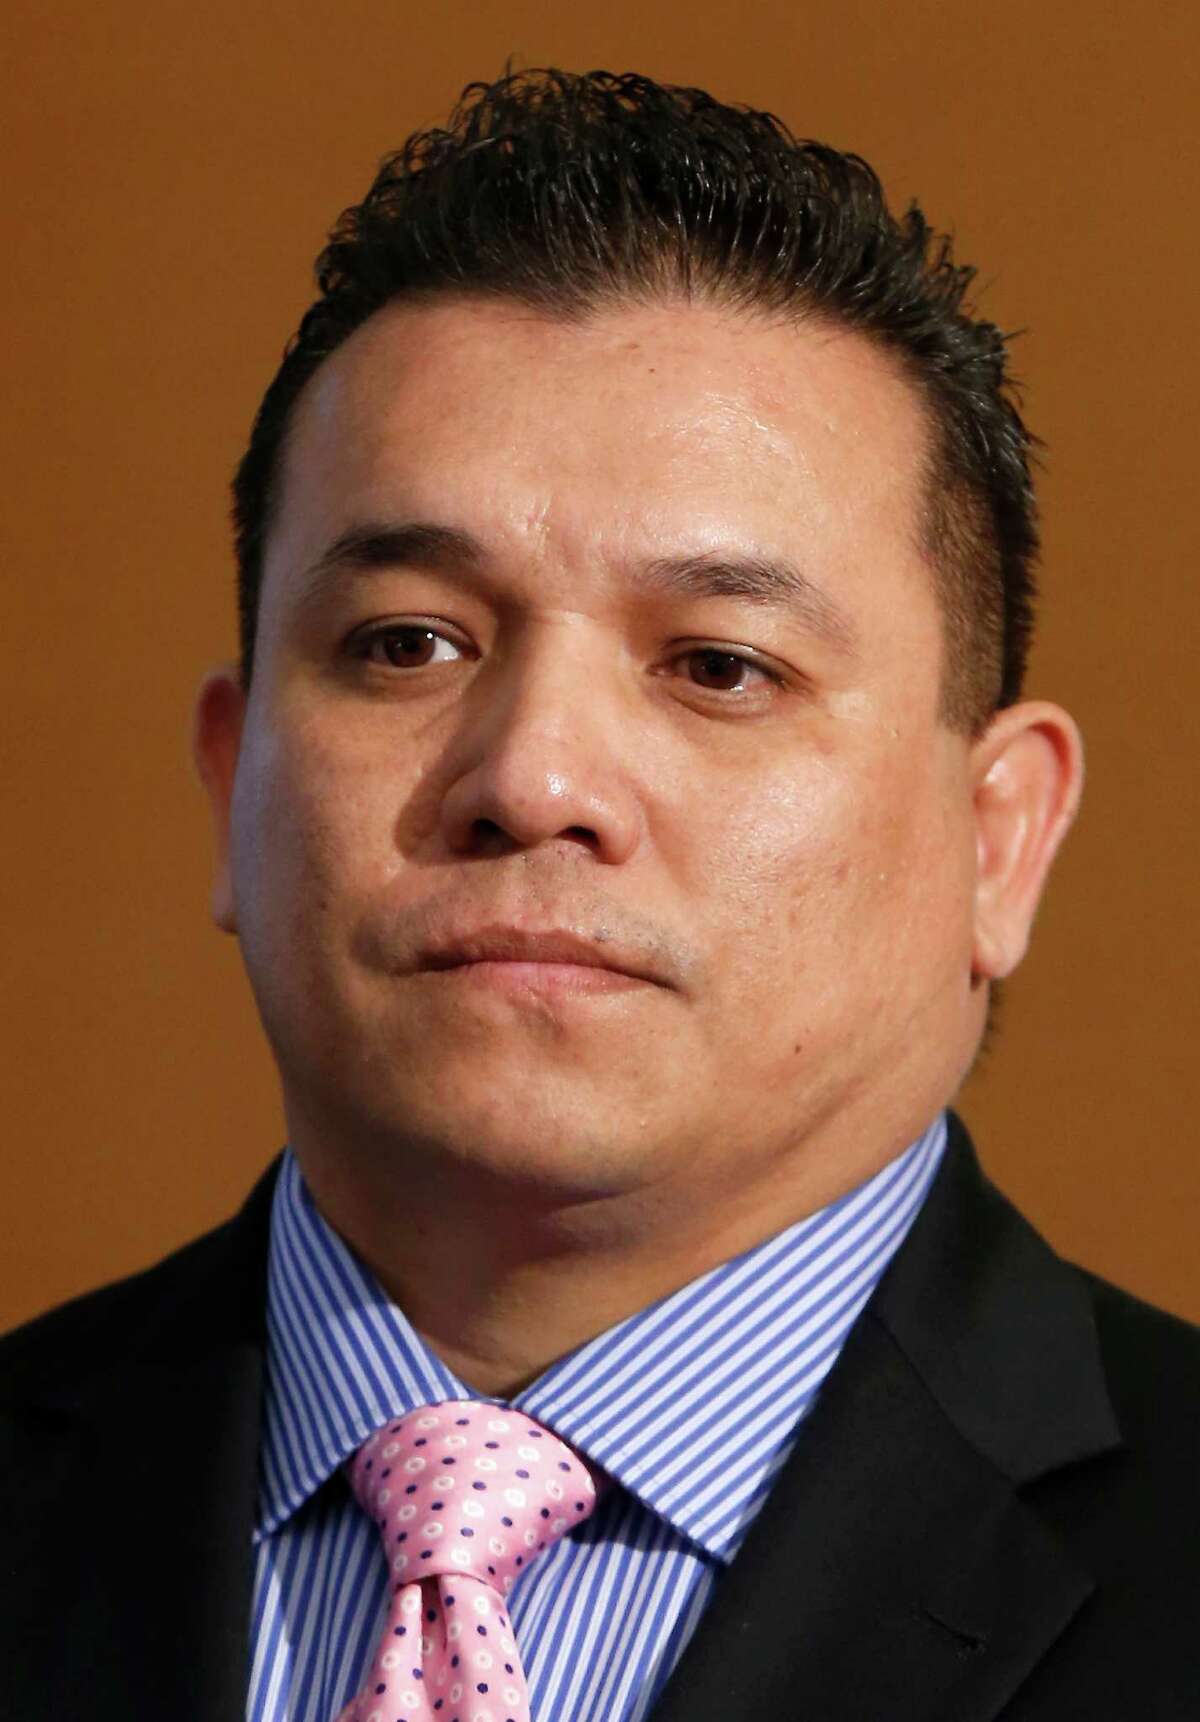 Willie Ng, Jr., seen in a Nov. 18, 2014, photo, will be chief investigator in the district attorney's office under Nico LaHood.